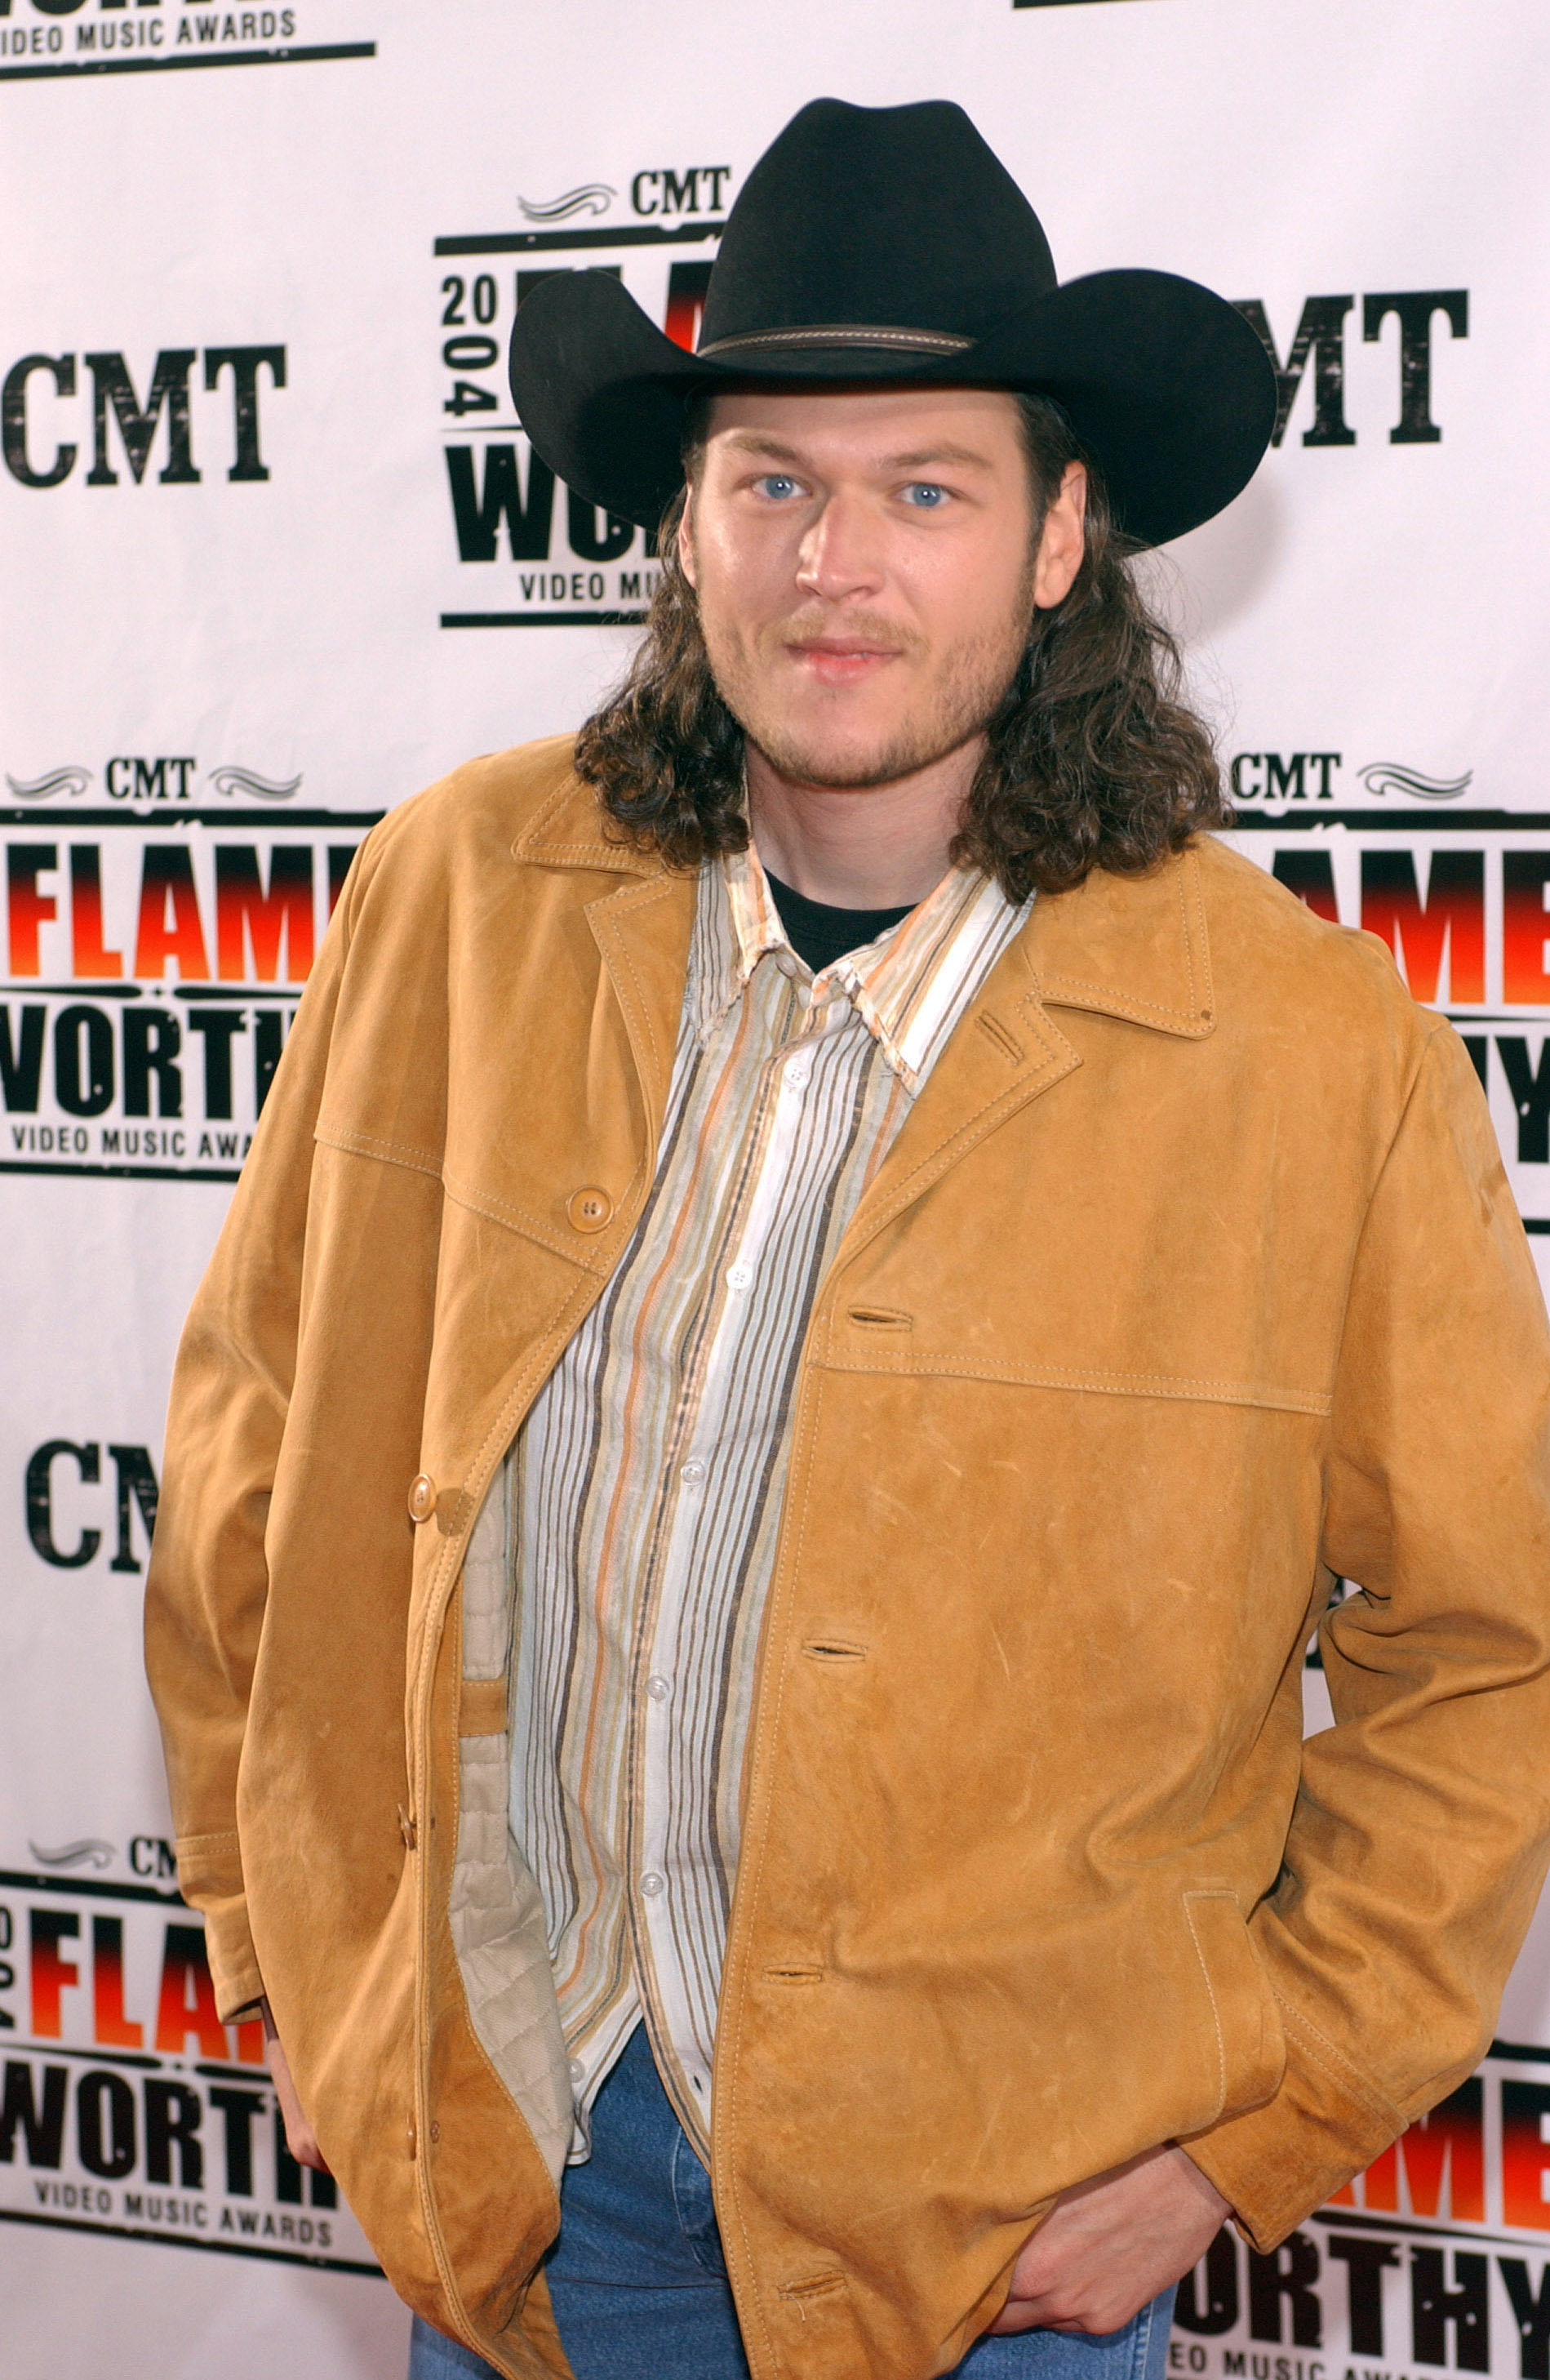 Blake Shelton during the CMT 2004 Flame Worthy Video Music Awards at Gaylord Entertainment Center on April 21, 2004 in Nashville, Tennessee | Source: Getty Images